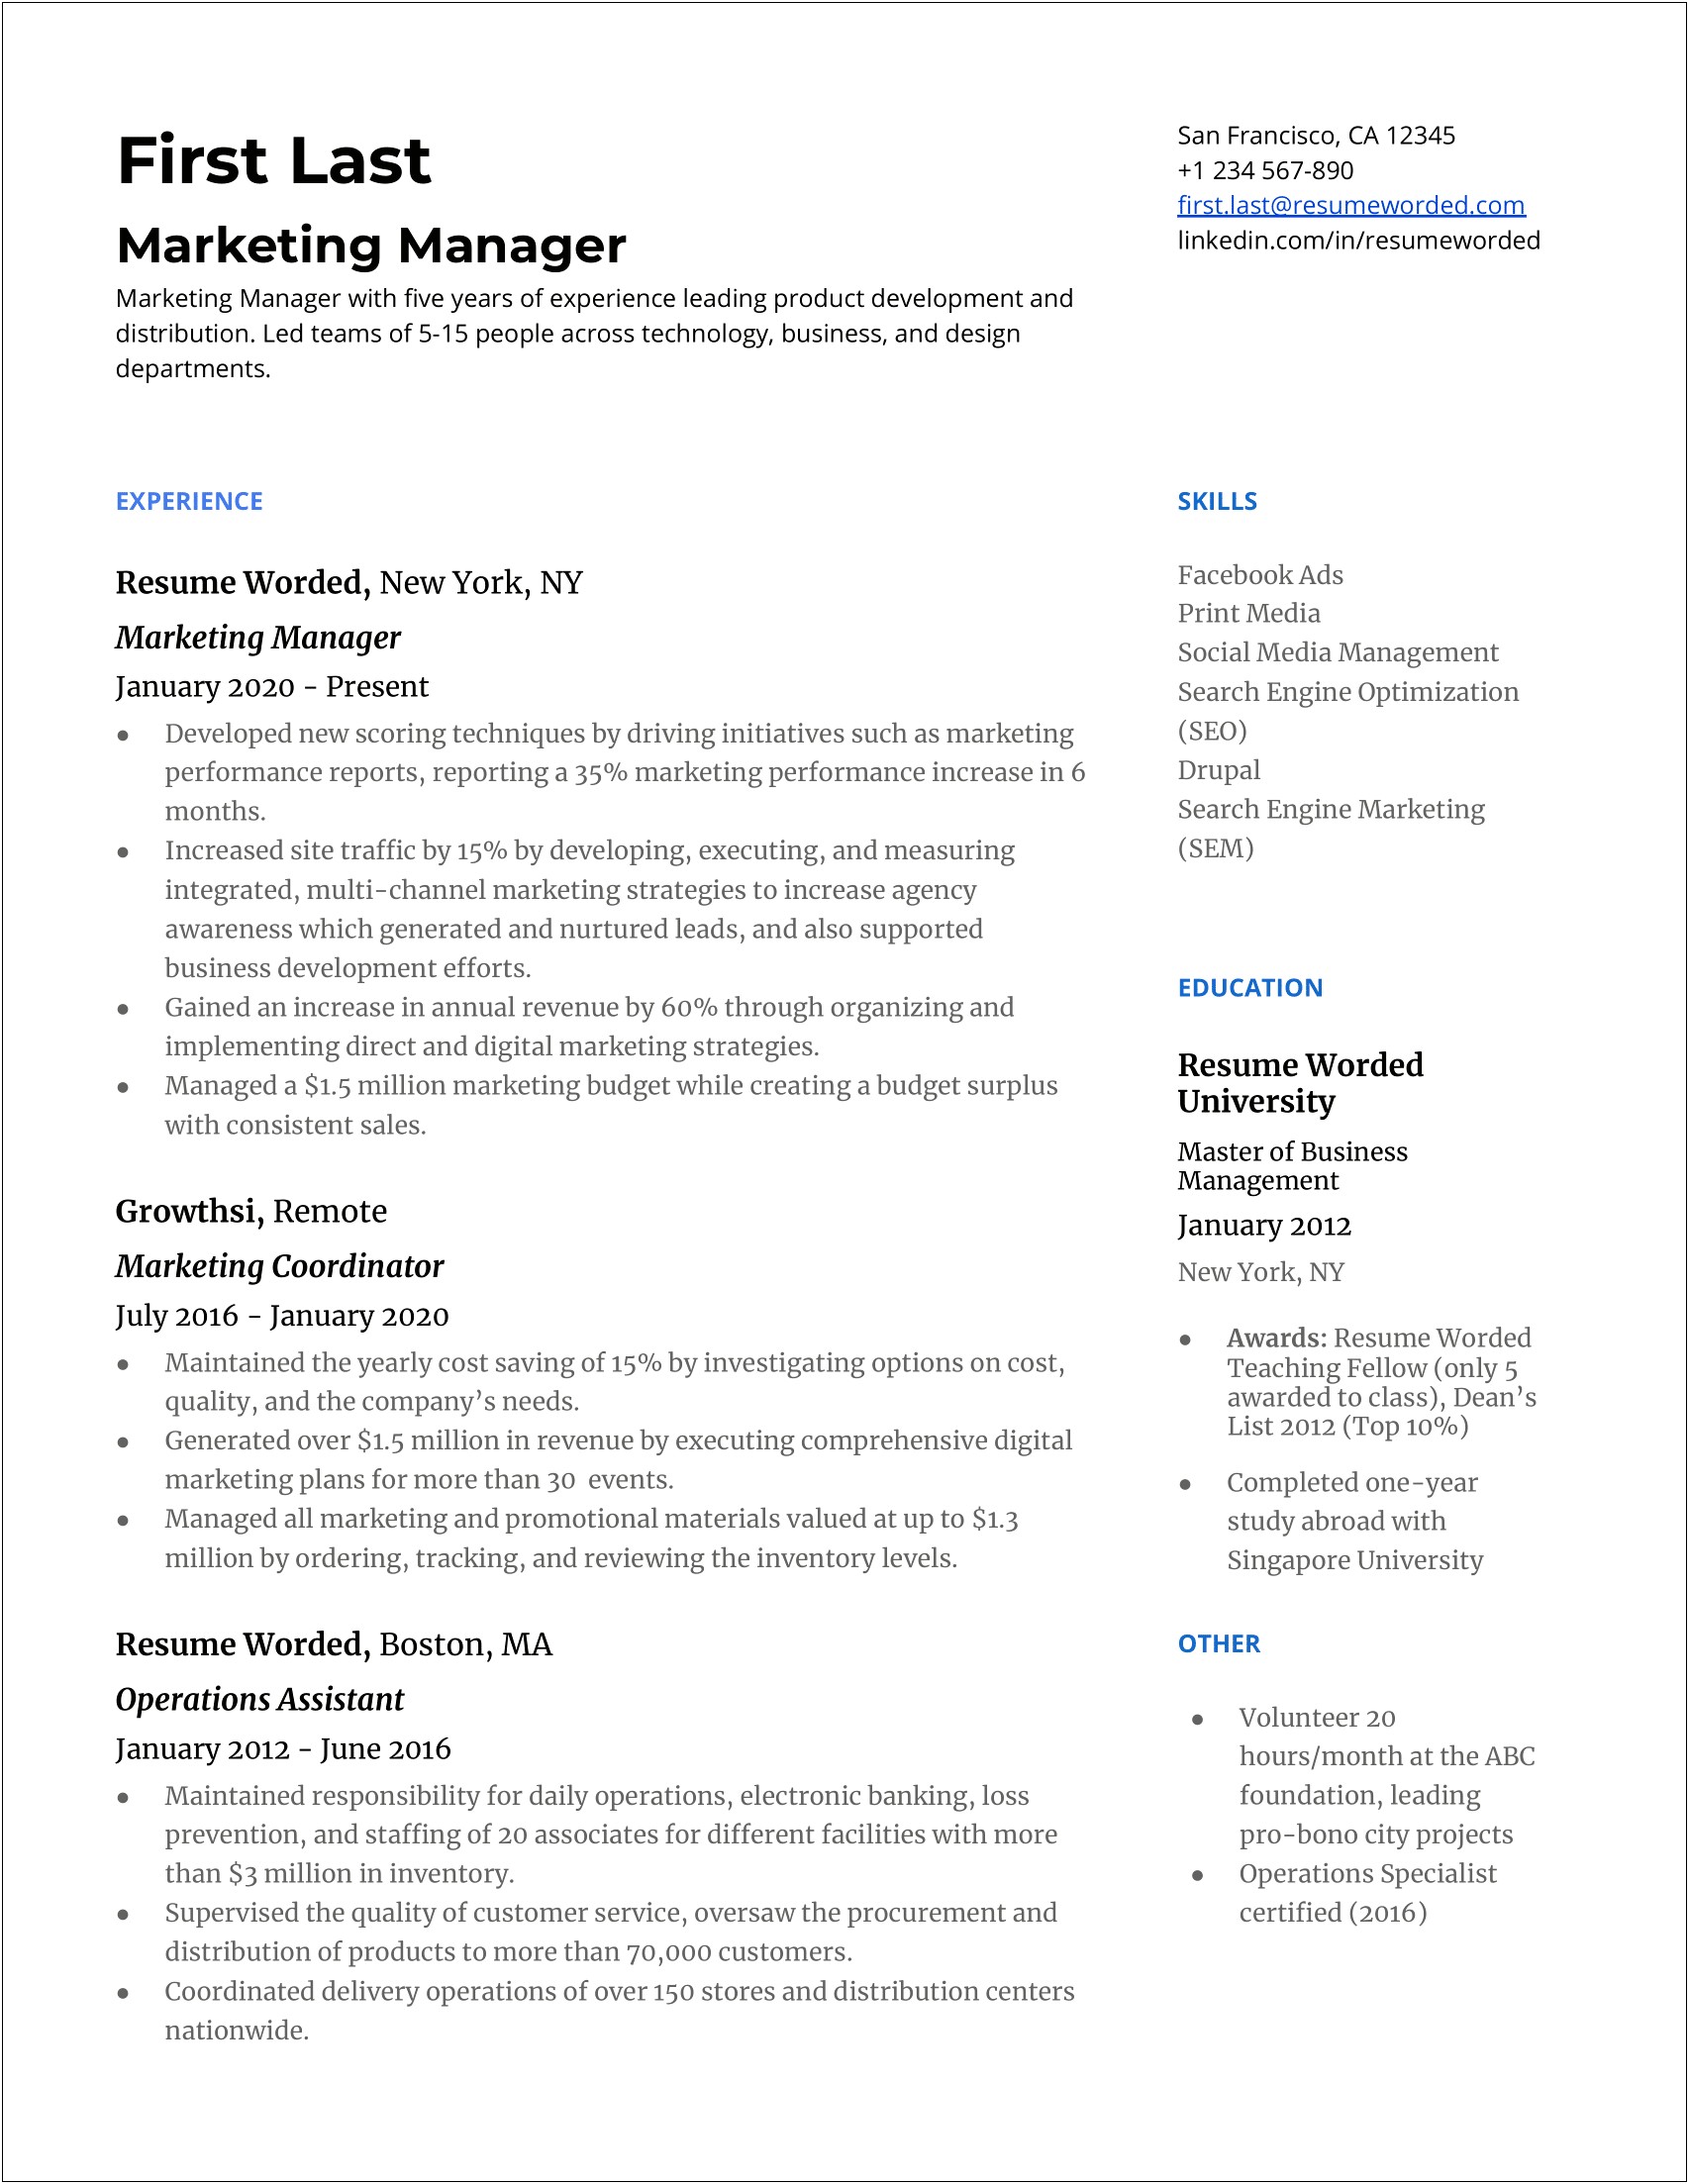 Sample Resume For Sales Manager Position